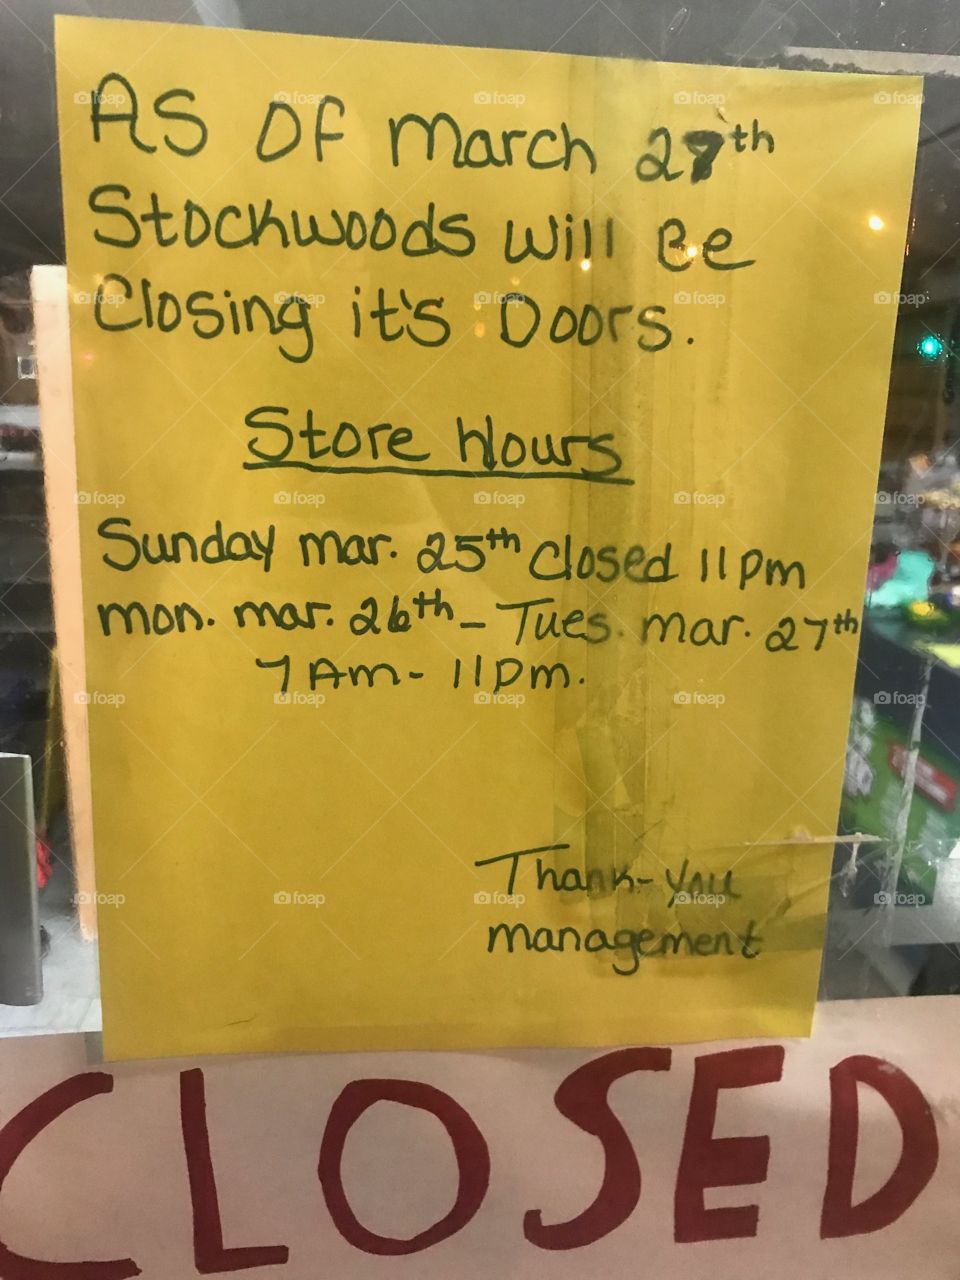 This is a letter in the window advising customers of the impending closure of stockwoods convenience store. It indicates the hours for the liquidation sale 